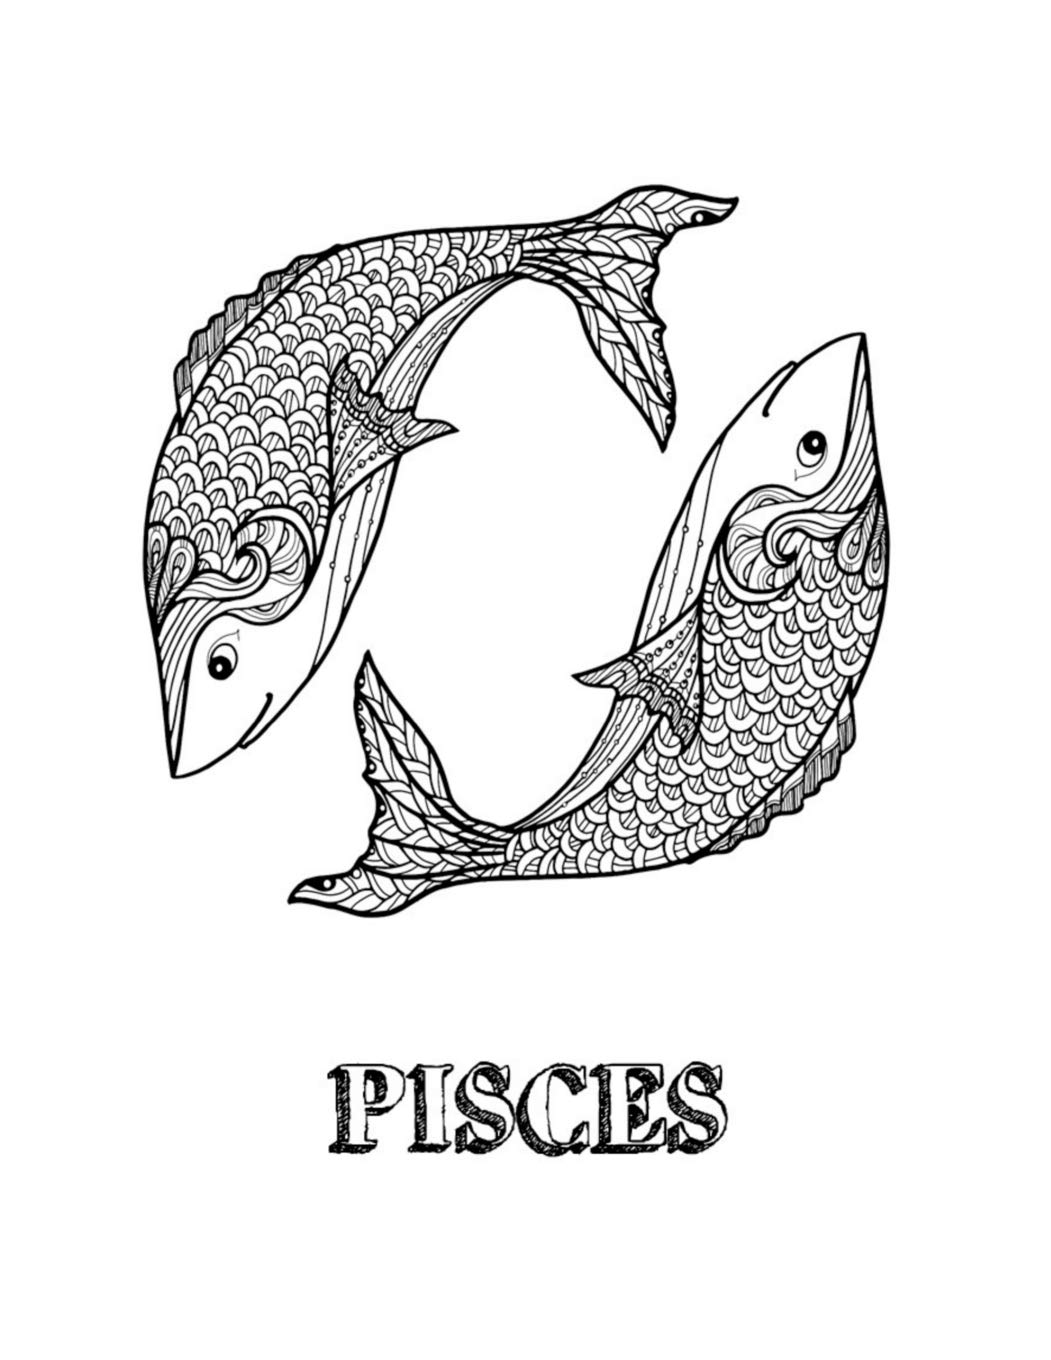 Pisces Coloring Pages - Coloring Home